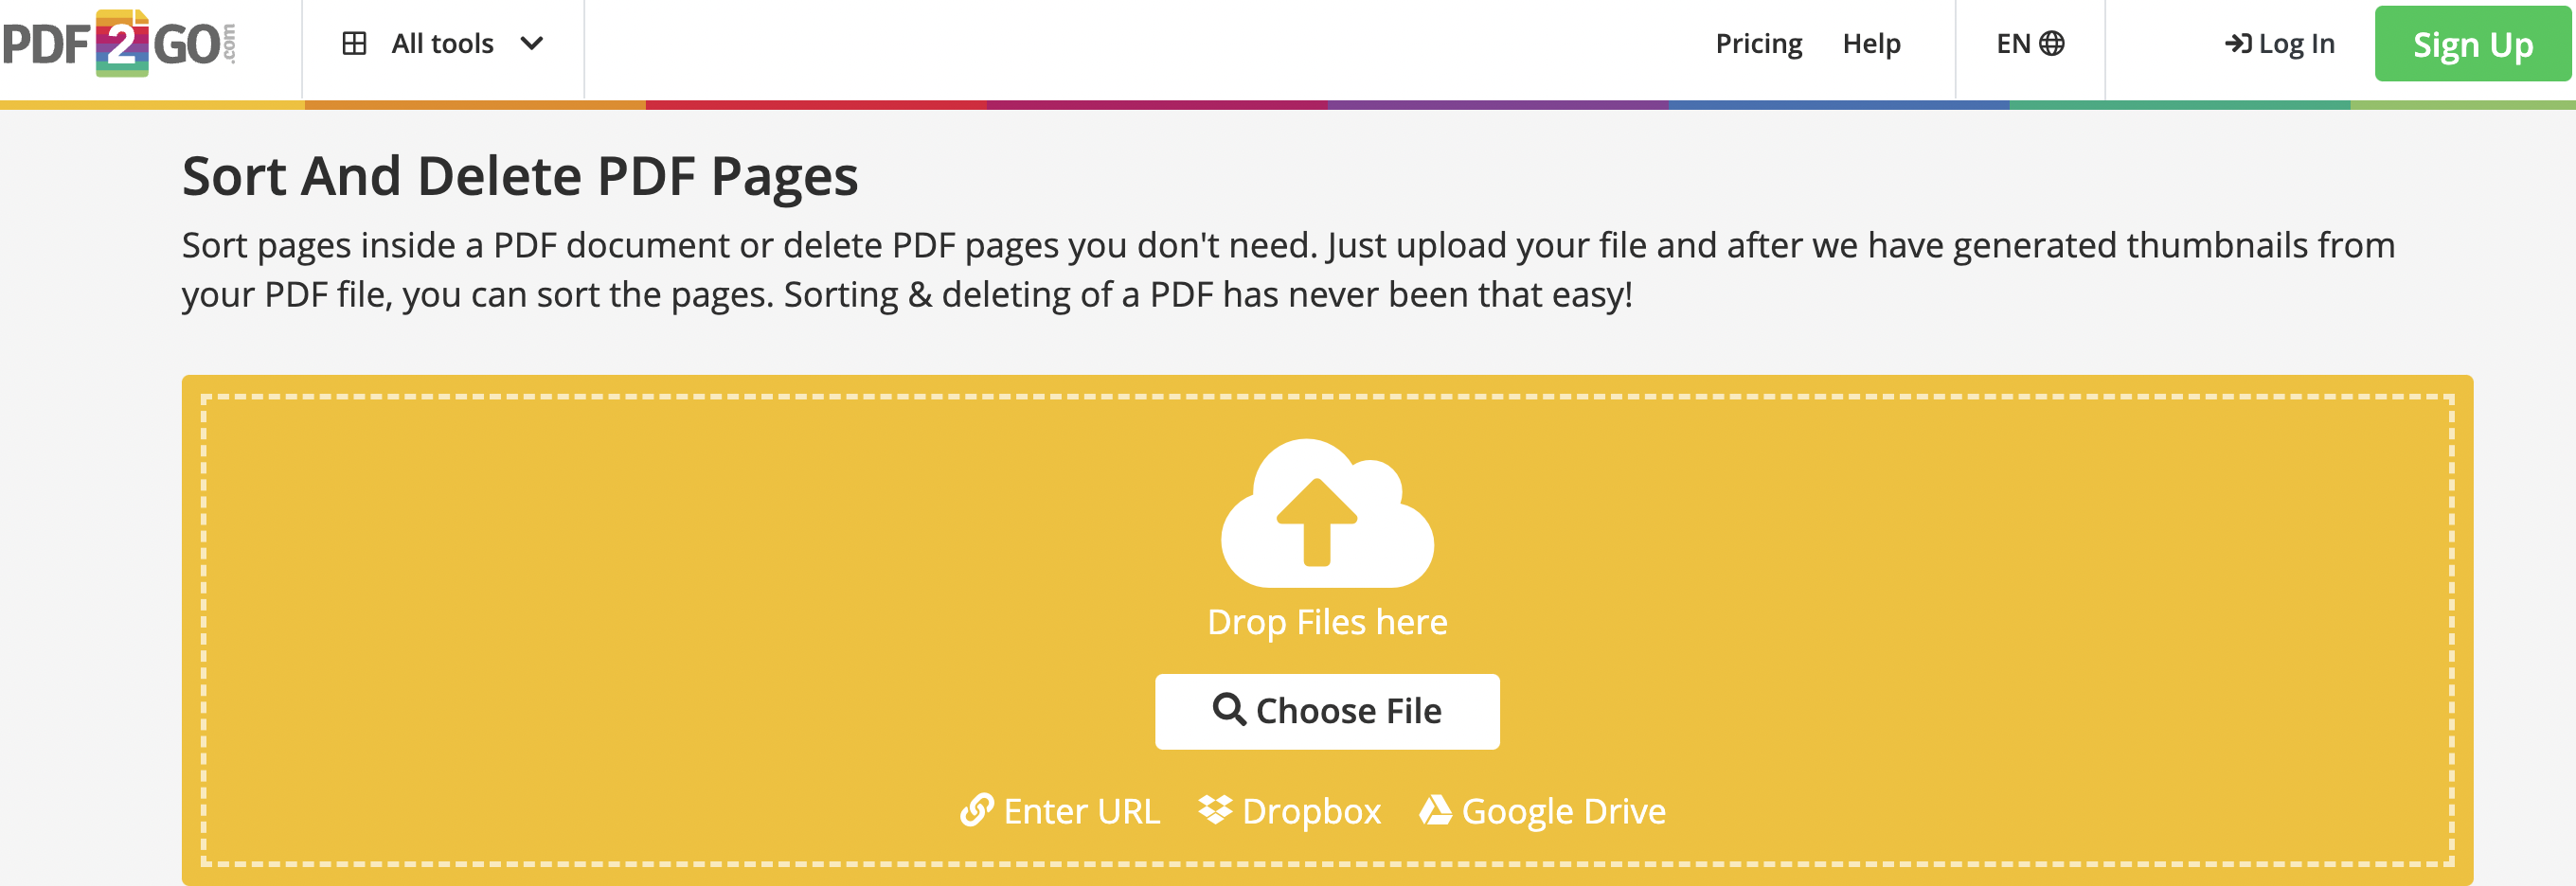 Sort and delete PDF pages